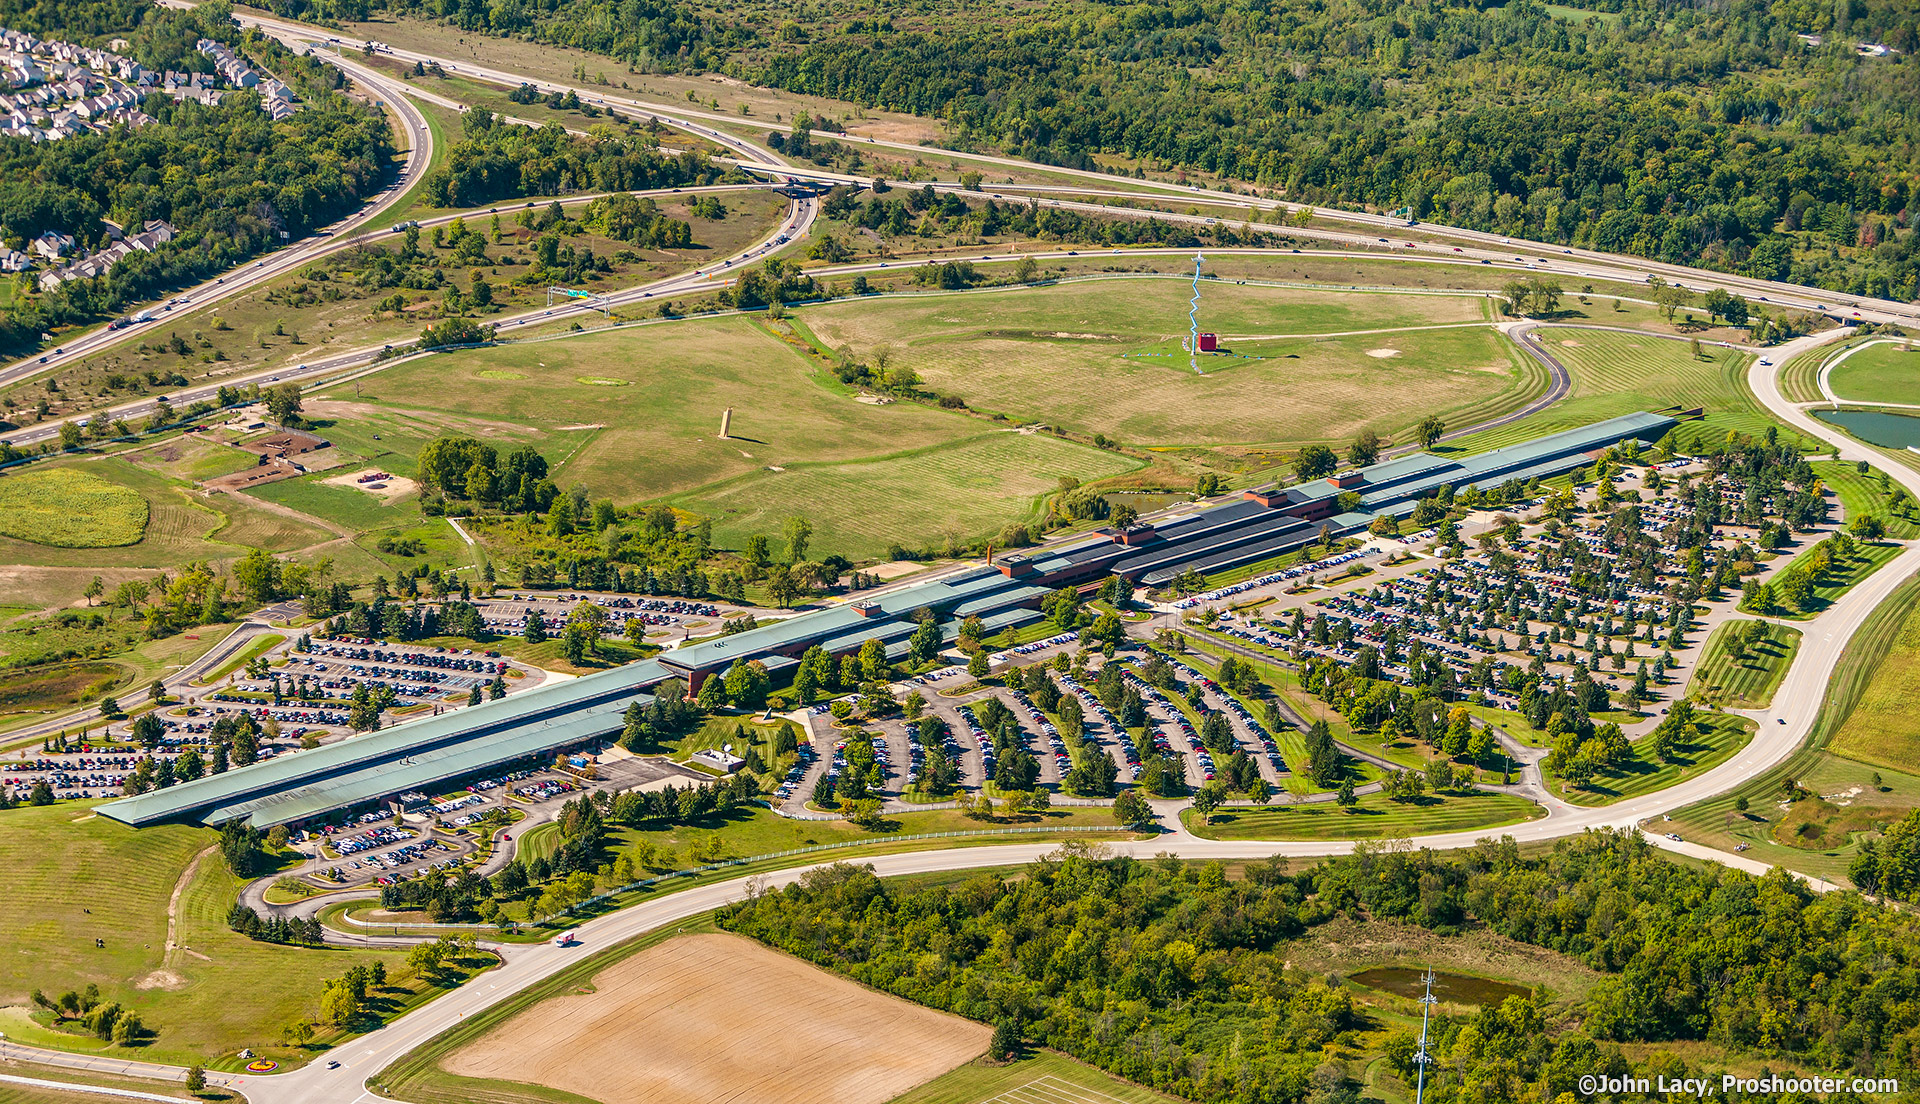 Aerial view of Dominoes Farms, Ann Arbor, by Proshooter